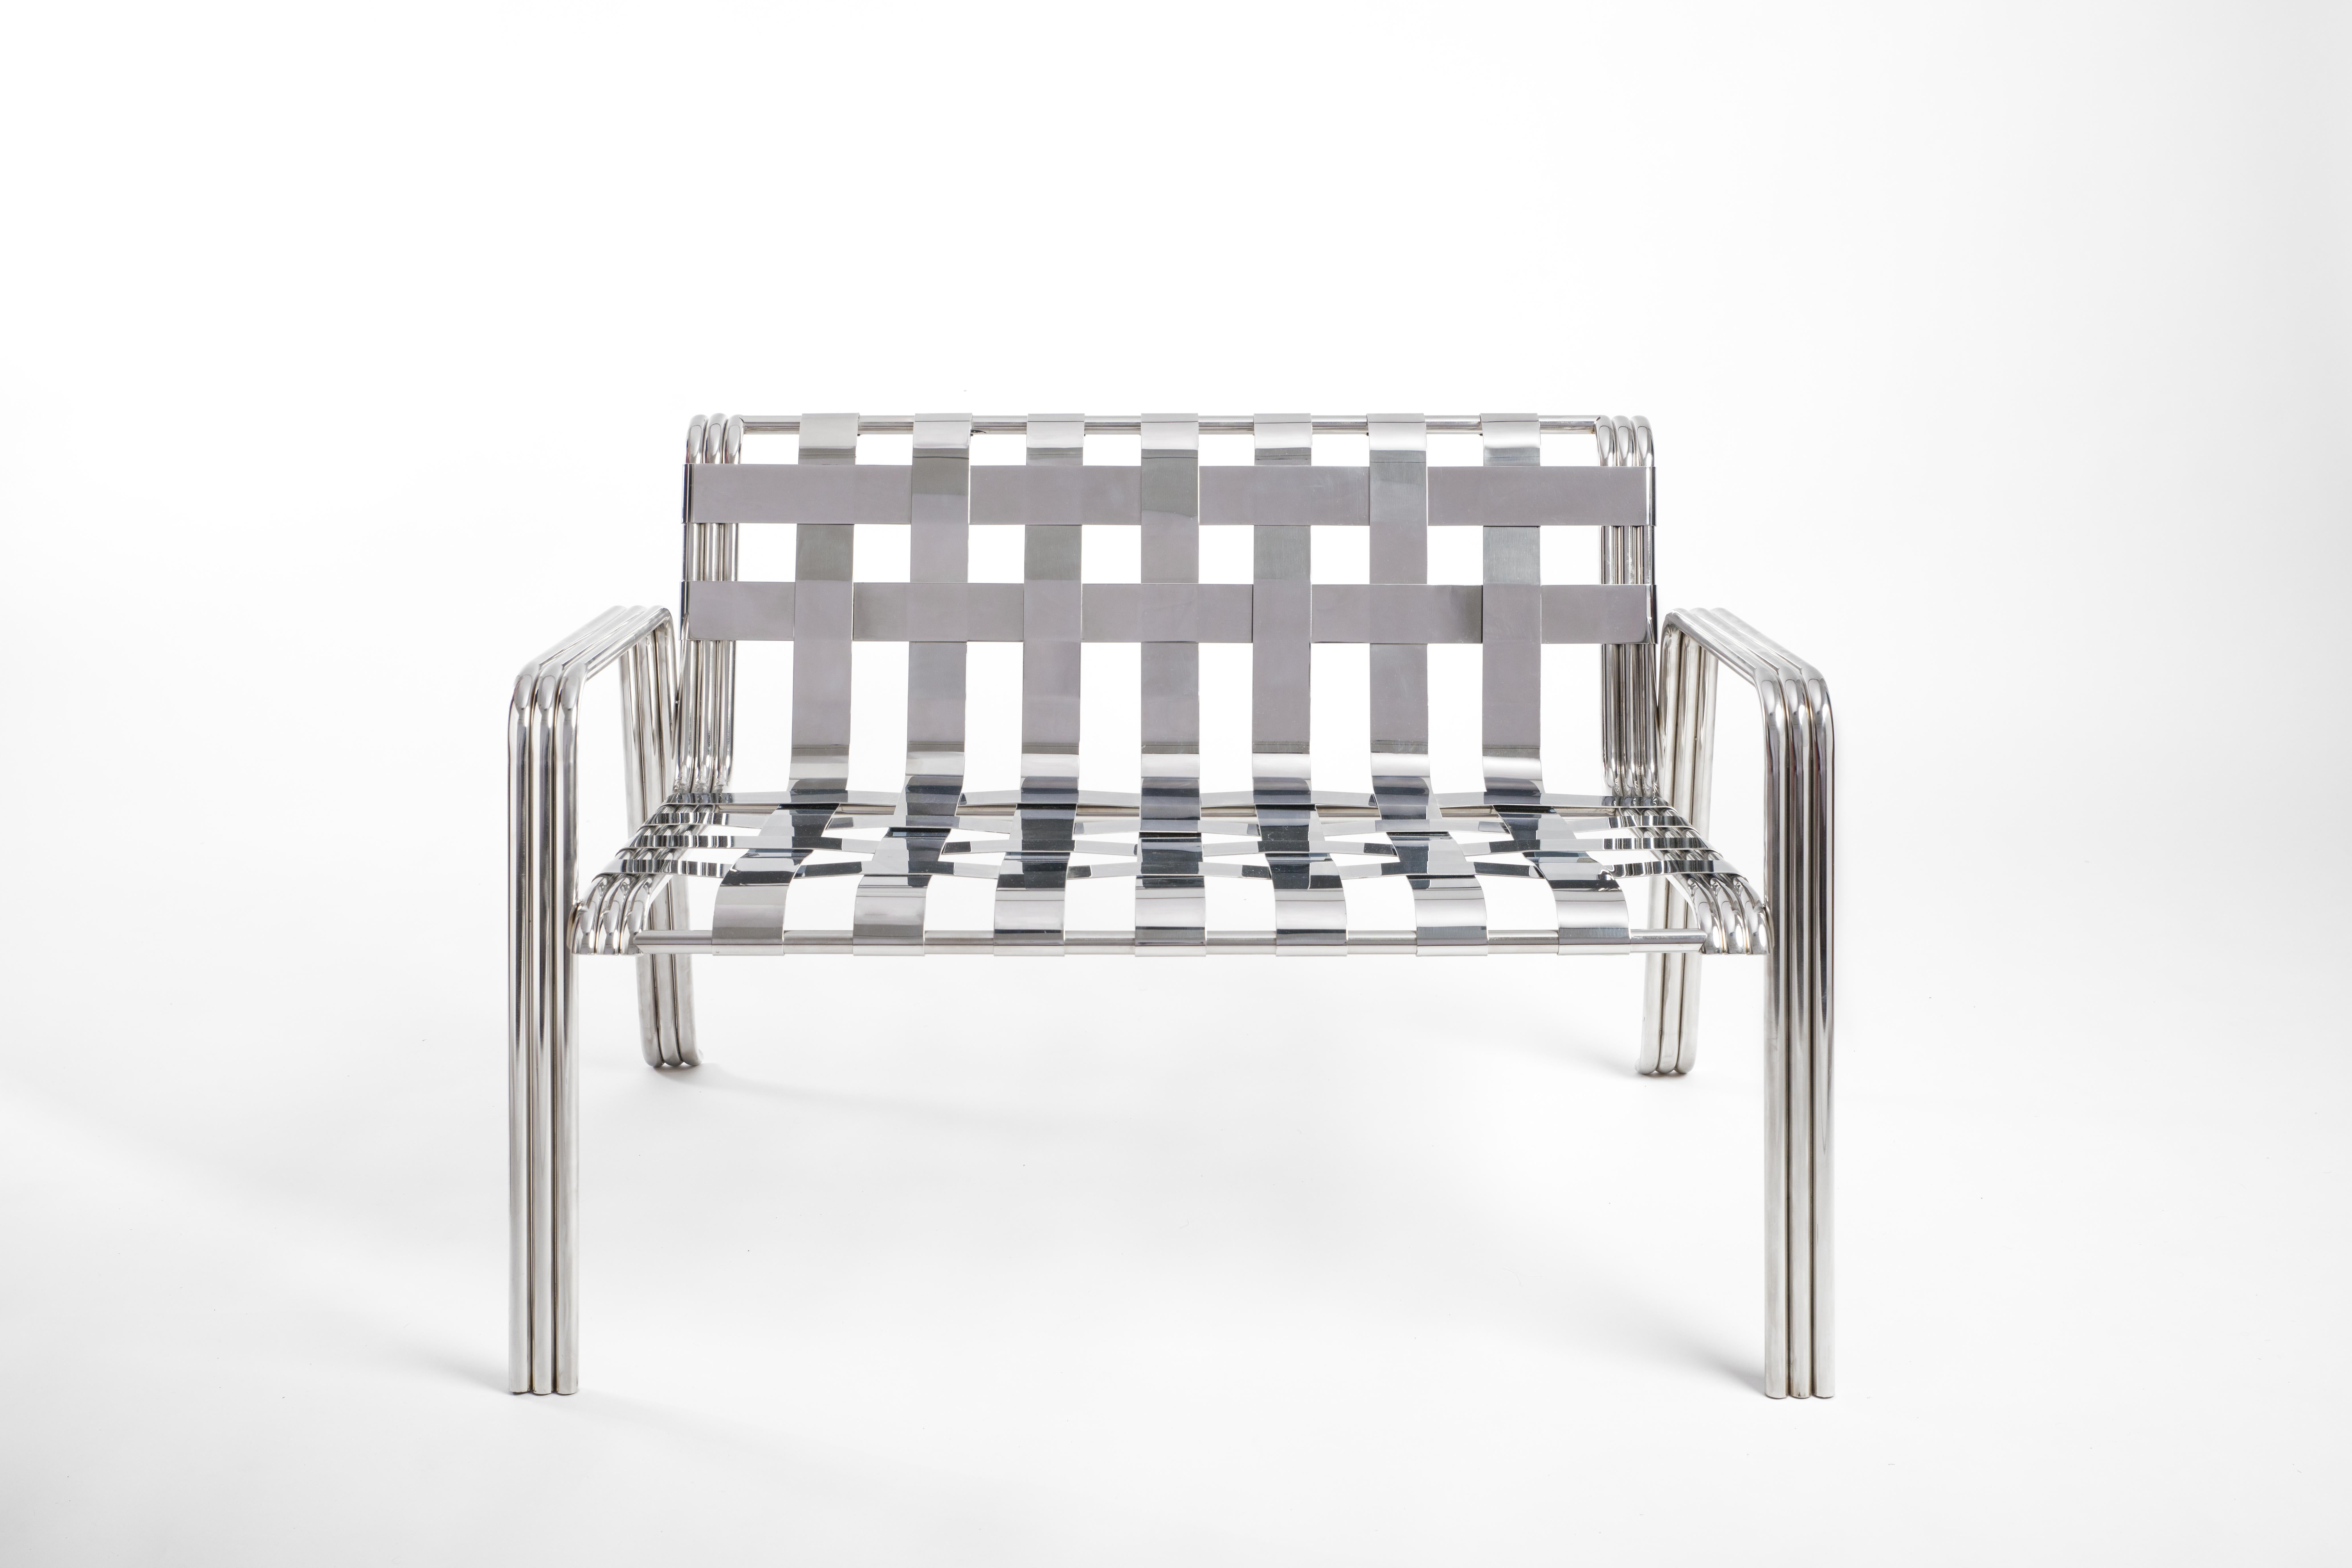 Traspade bench by Testatonda
Dimensions: D 79 x W 100 x H 75 cm.
Materials: stainless steel.

The Trespade collection is the repetition of dimensions, the intertwining of materials, colors and reflections: our way of interpreting the